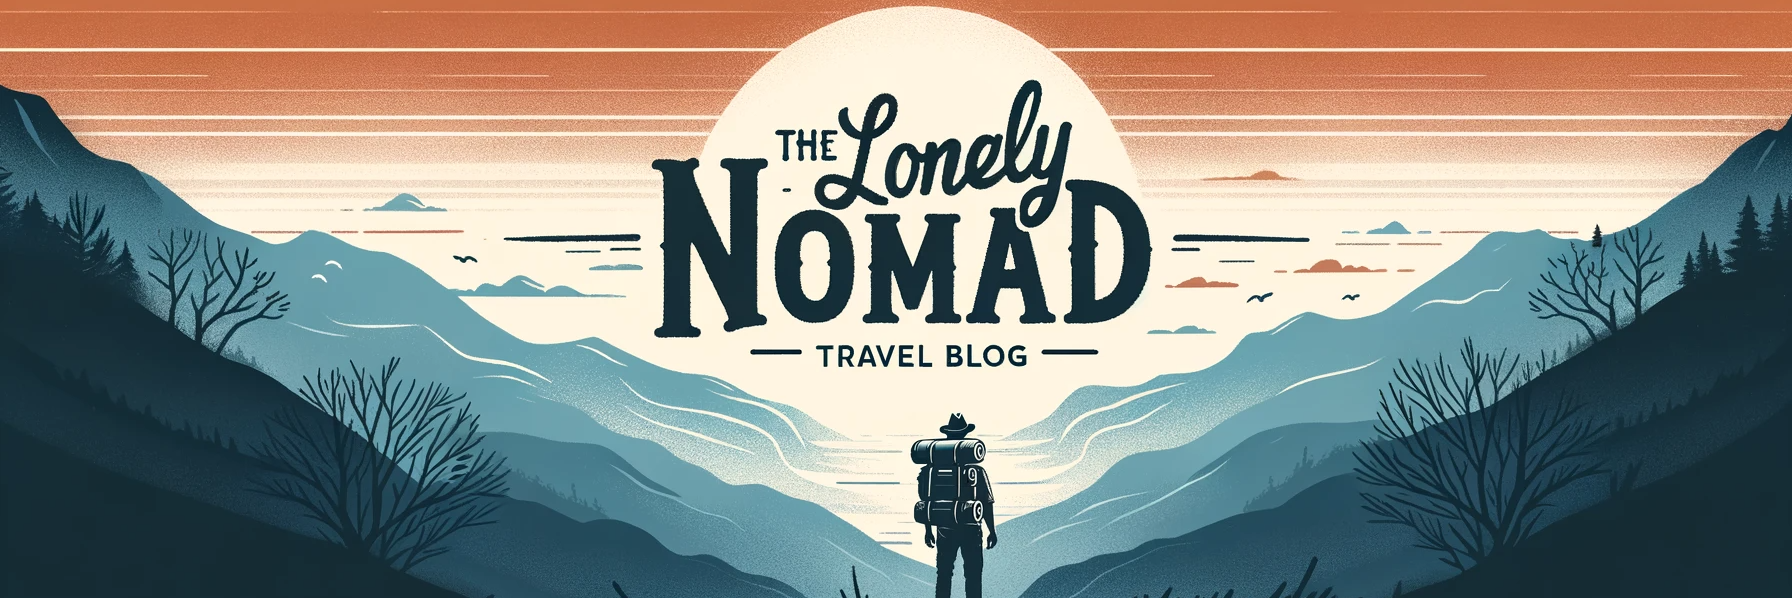 The Lonely Nomad